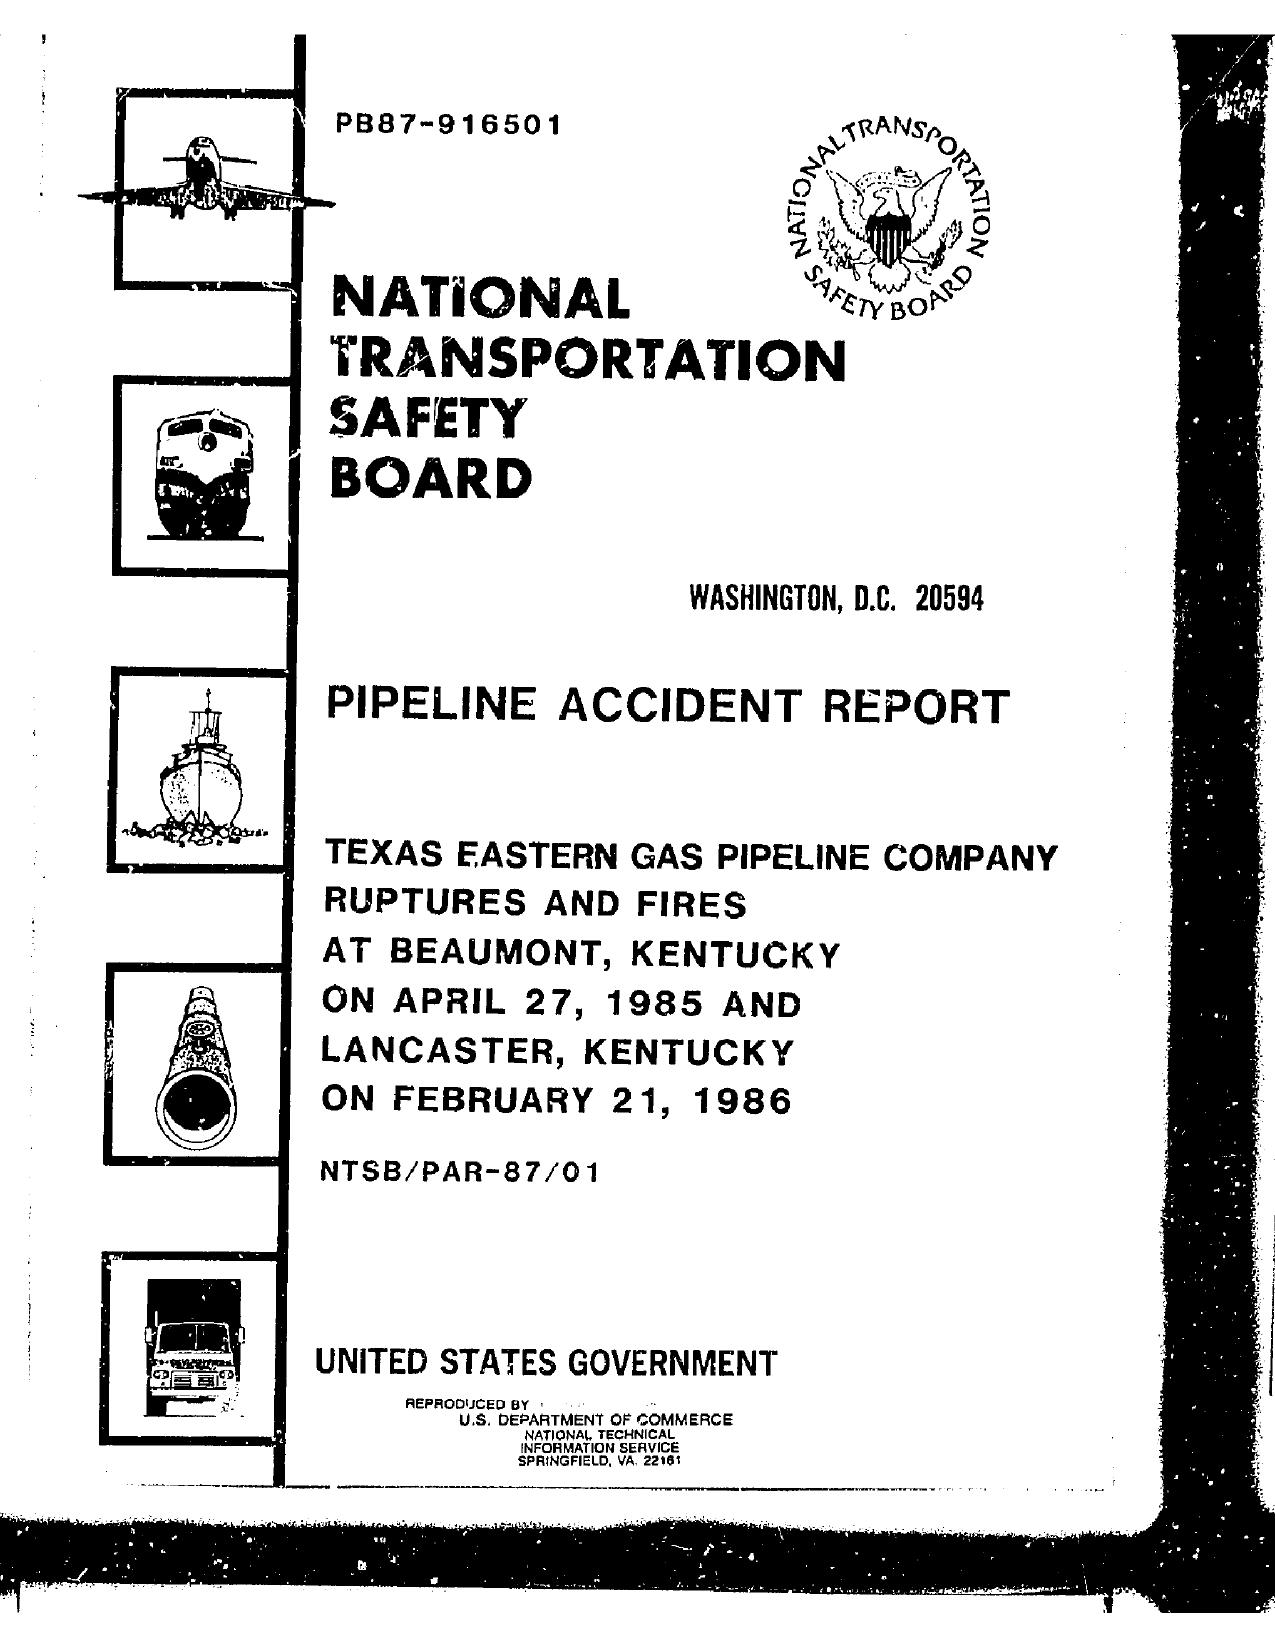 1275x1650 at Beaumont, Kentucky on April 27, 1985 and Lancaster, Kentucky on February 21, 1986, in Texas Eastern Gas Pipeline Company Ruptures and Fires, by John S. Quarterman, for SpectraBusters.org, 18 February 1987